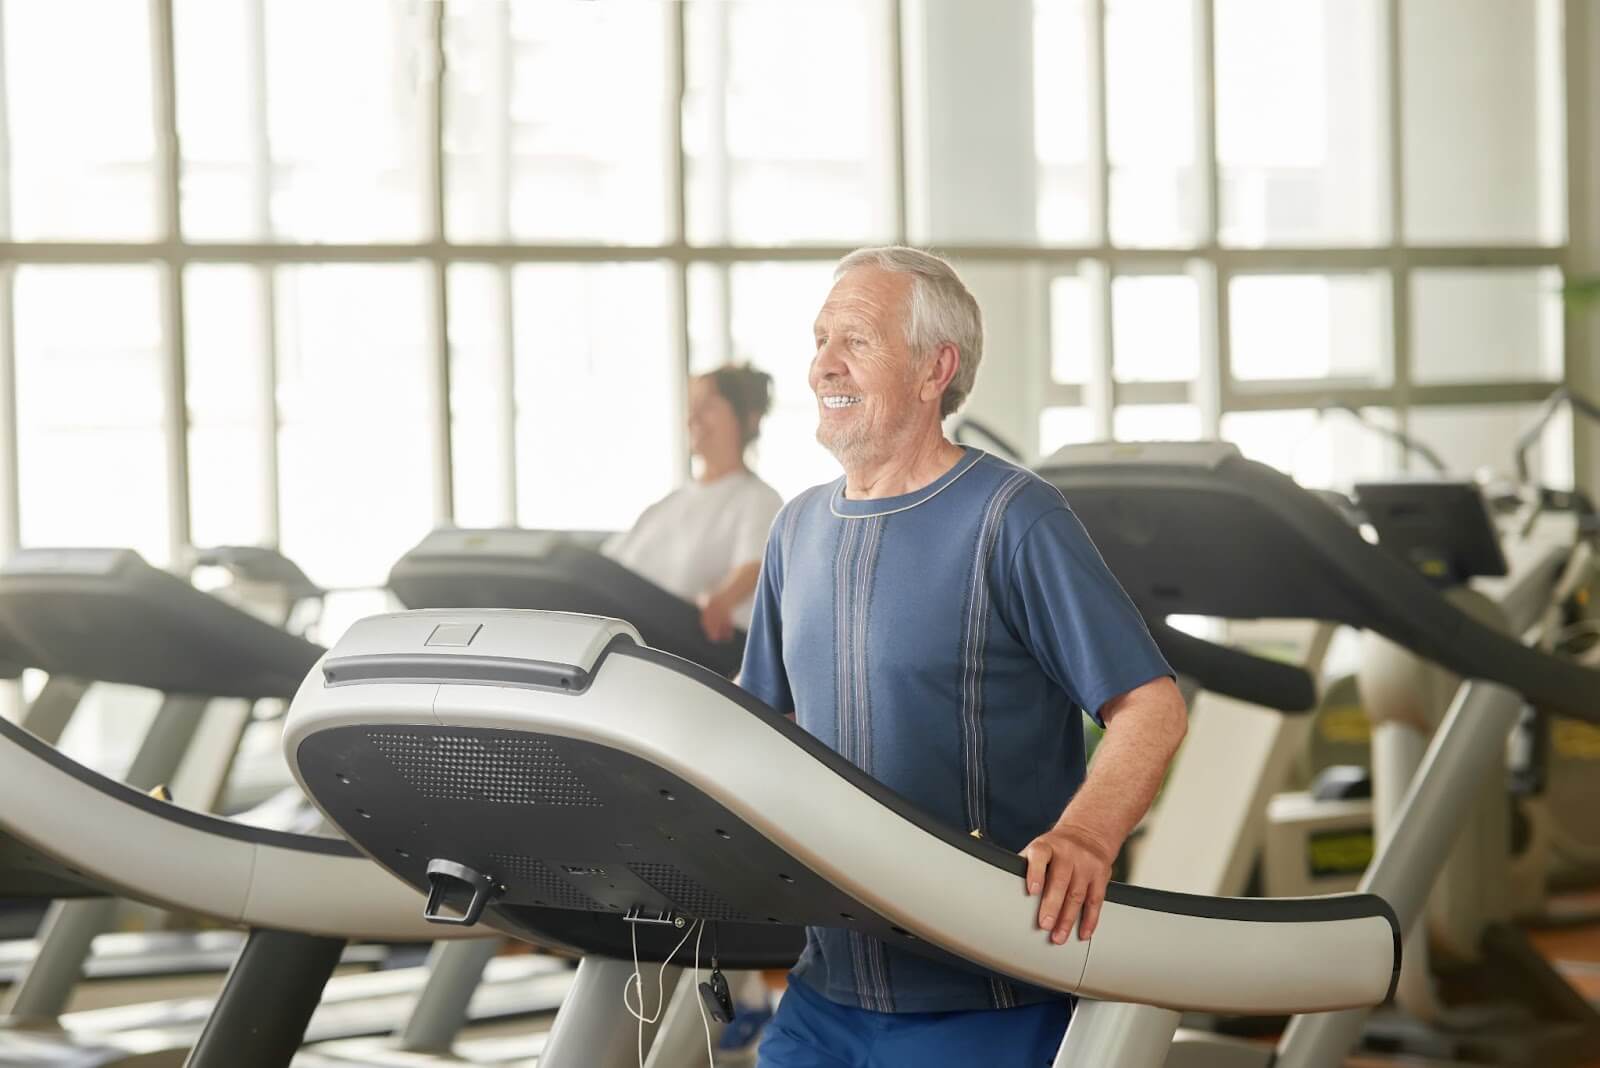 Aging adult smiling in the gym while exercising on a treadmill